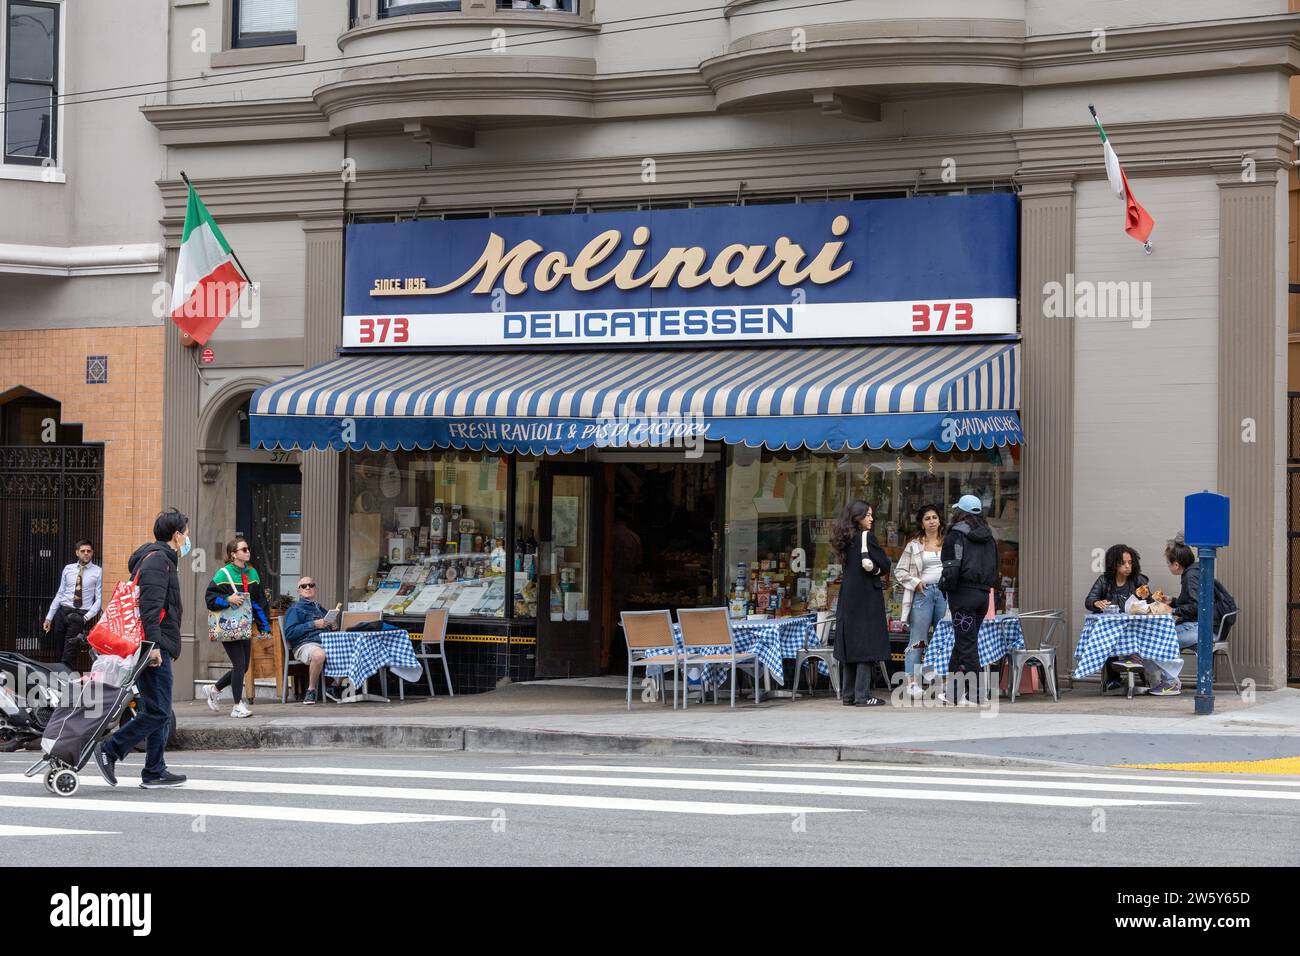 Molinari A Popular Delicatessen In North Beach San Francisco, June 24, 2023, Customers Sat Outside Enjoying Coffee And Pastries Stock Photo